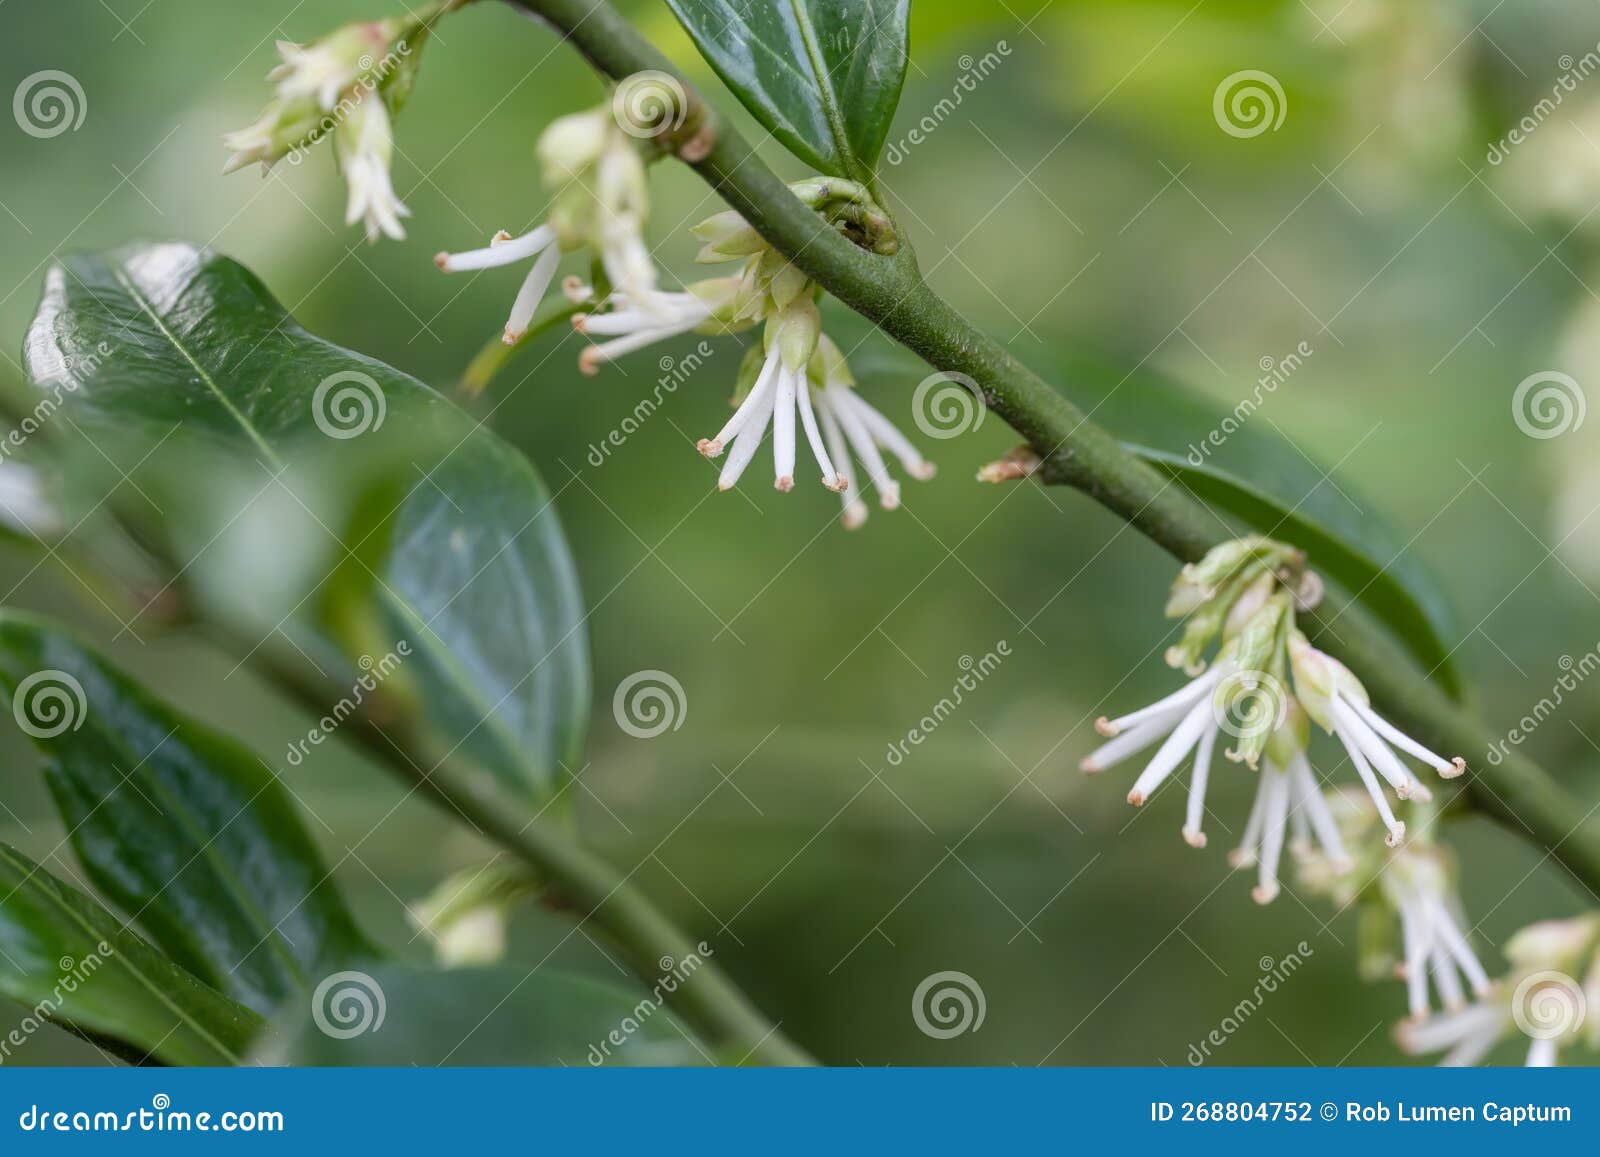 himalayan sweet box, sarcococca hookeriana close-up fragrant white flowers